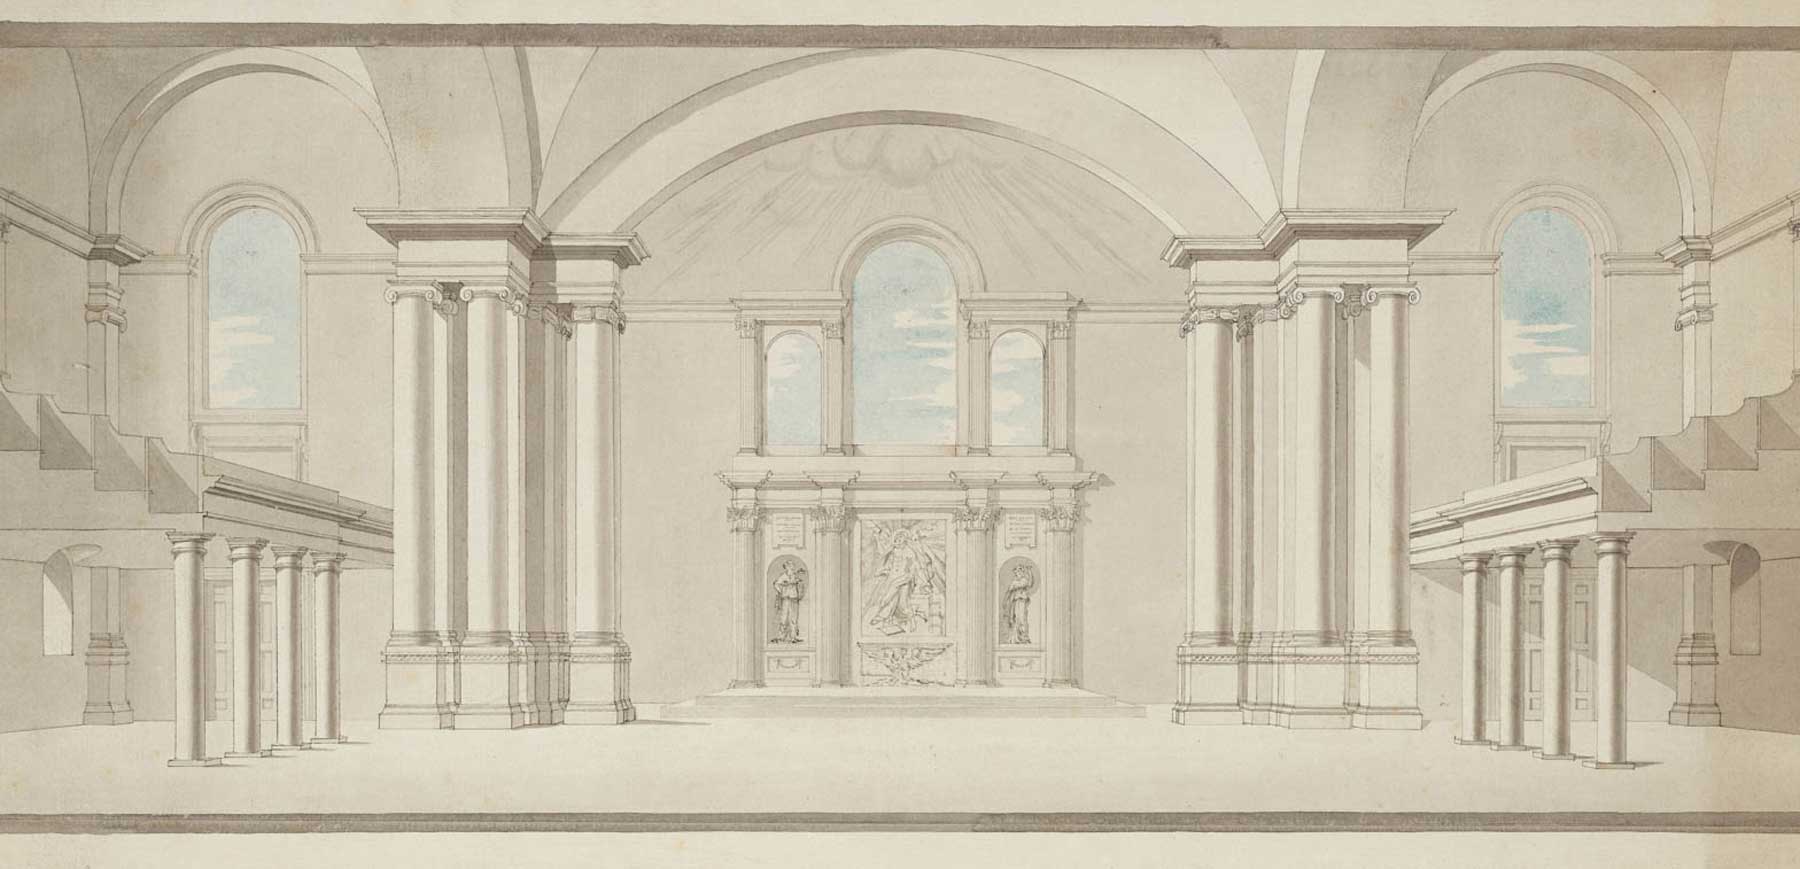 An early view of James Spiller's design for the interior of the new Hackney Church, showing the nave much as it looks today.